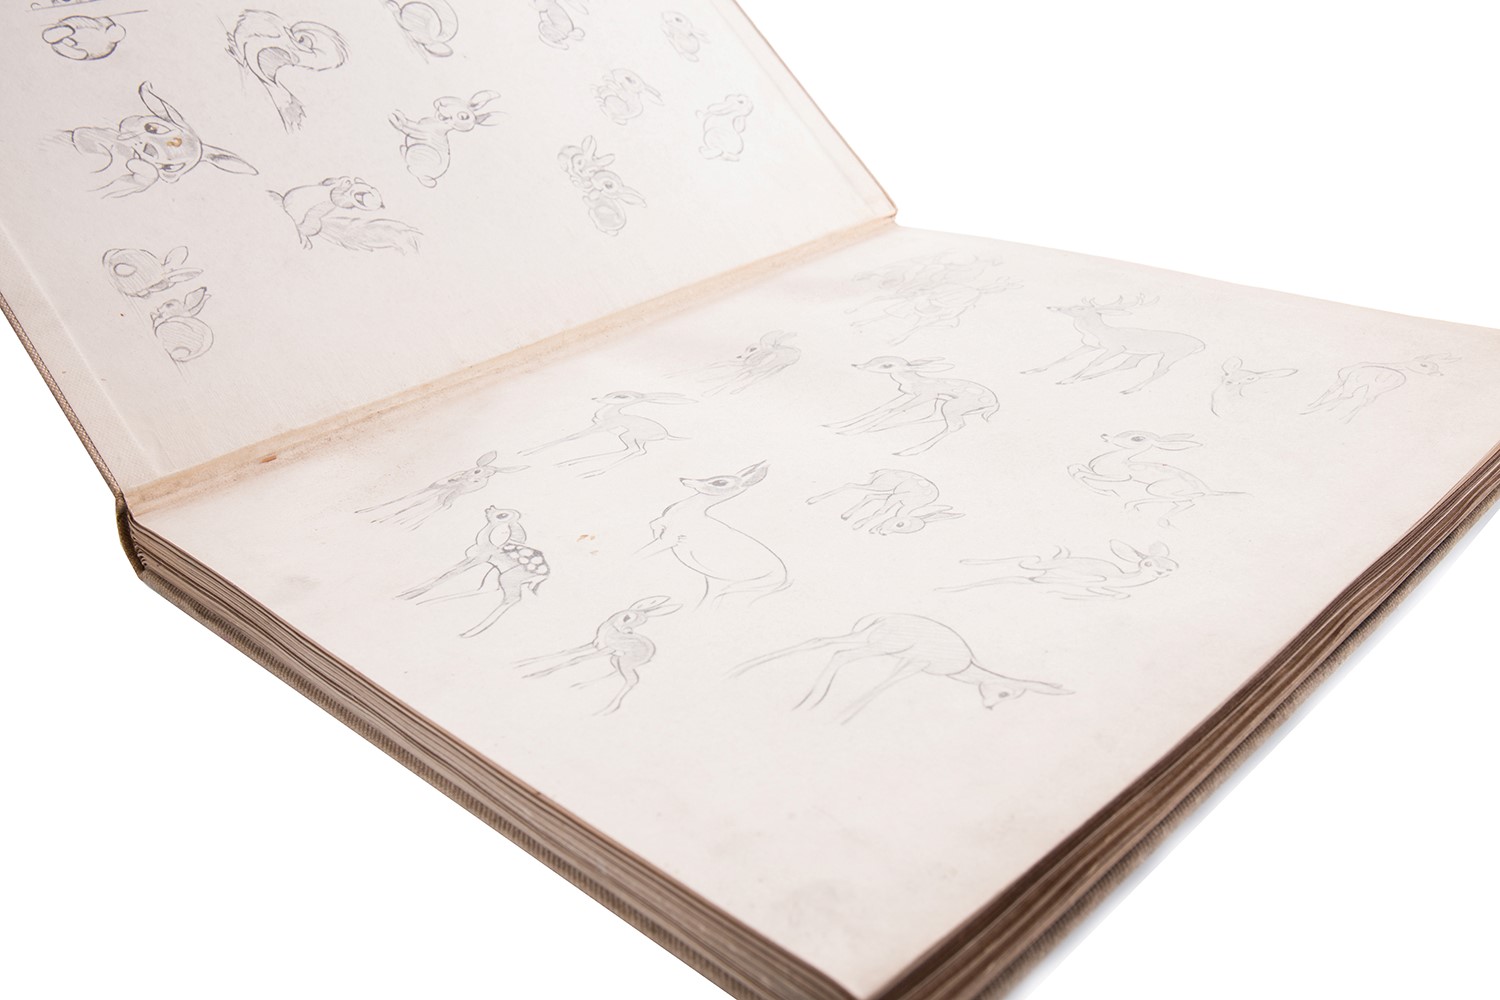 WALT DISNEY 'SKETCH BOOK' printed and bound by Wm. Collins, Sons & Co. - Image 3 of 18